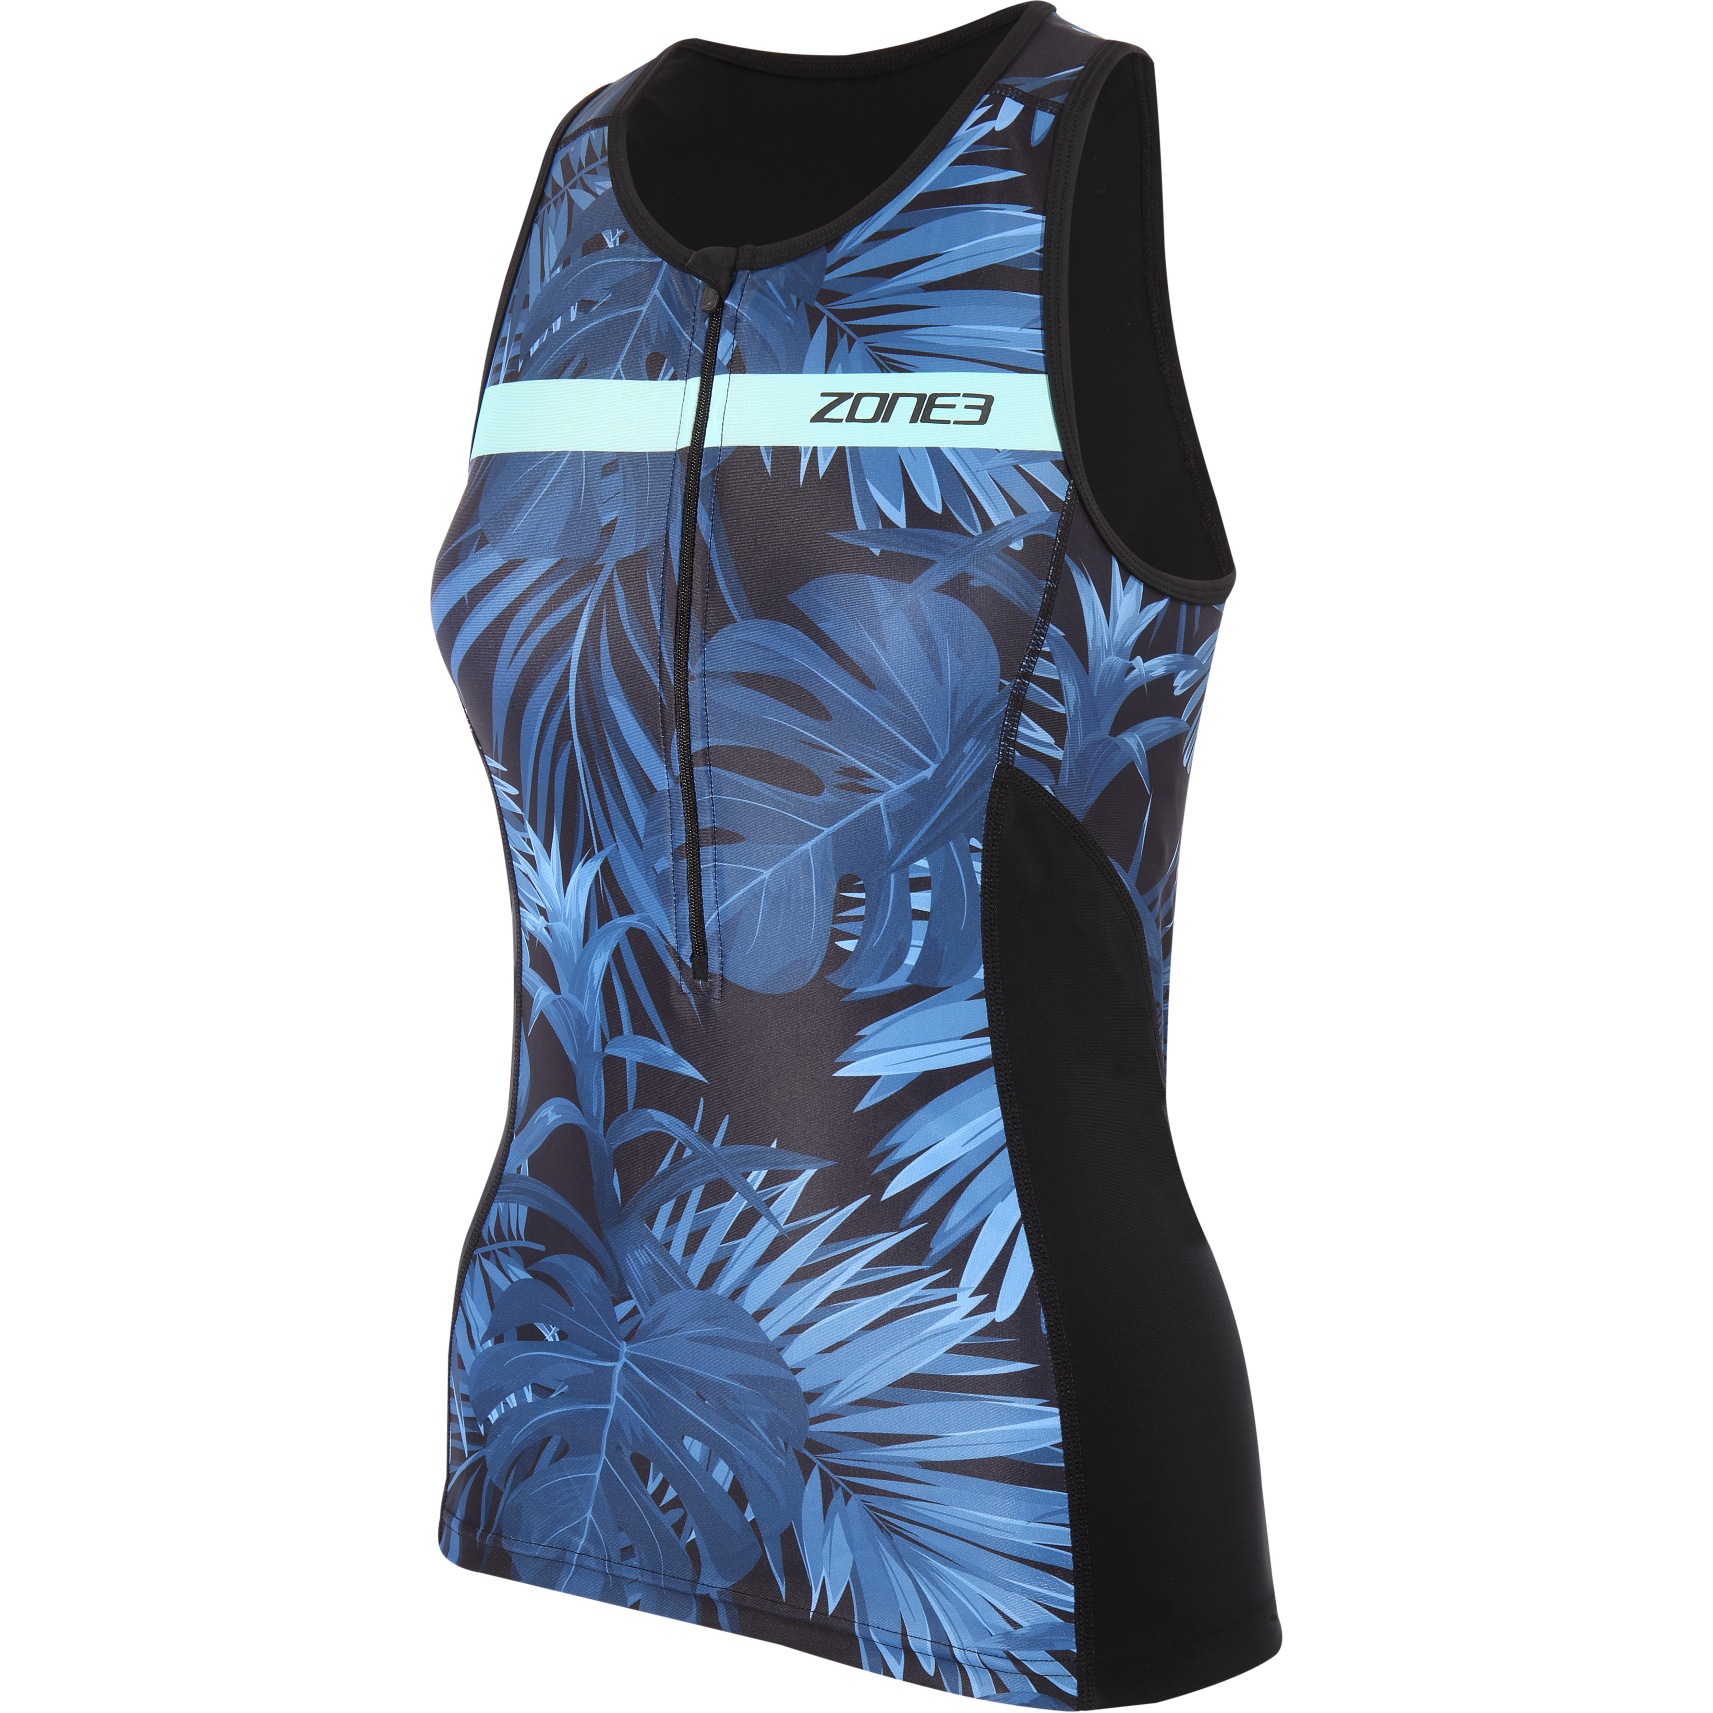 Image of Zone3 Women's Activate Plus Tropical Palm Sleeveless Tri Top - black/mint